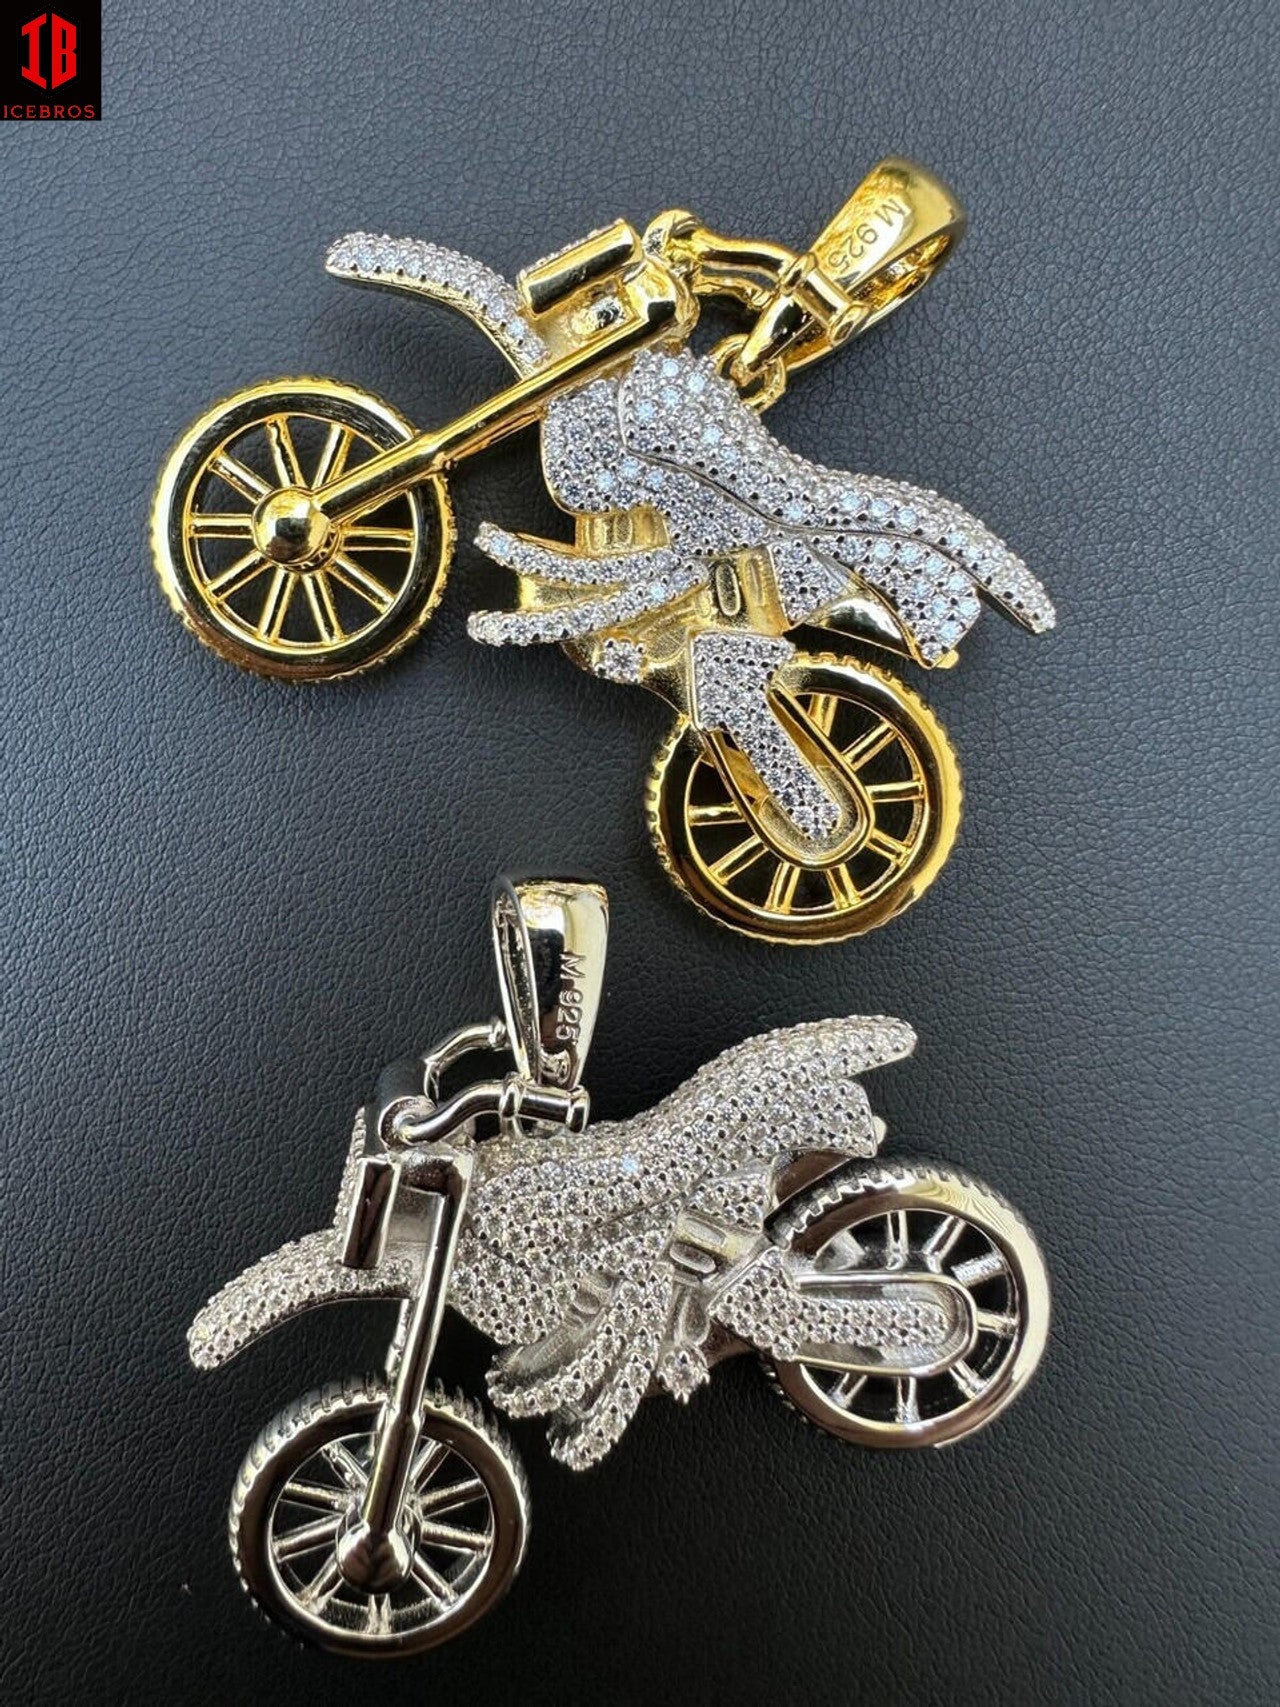 Two Different Color Variation of Moissanite Dirt Bike Pendant Necklace